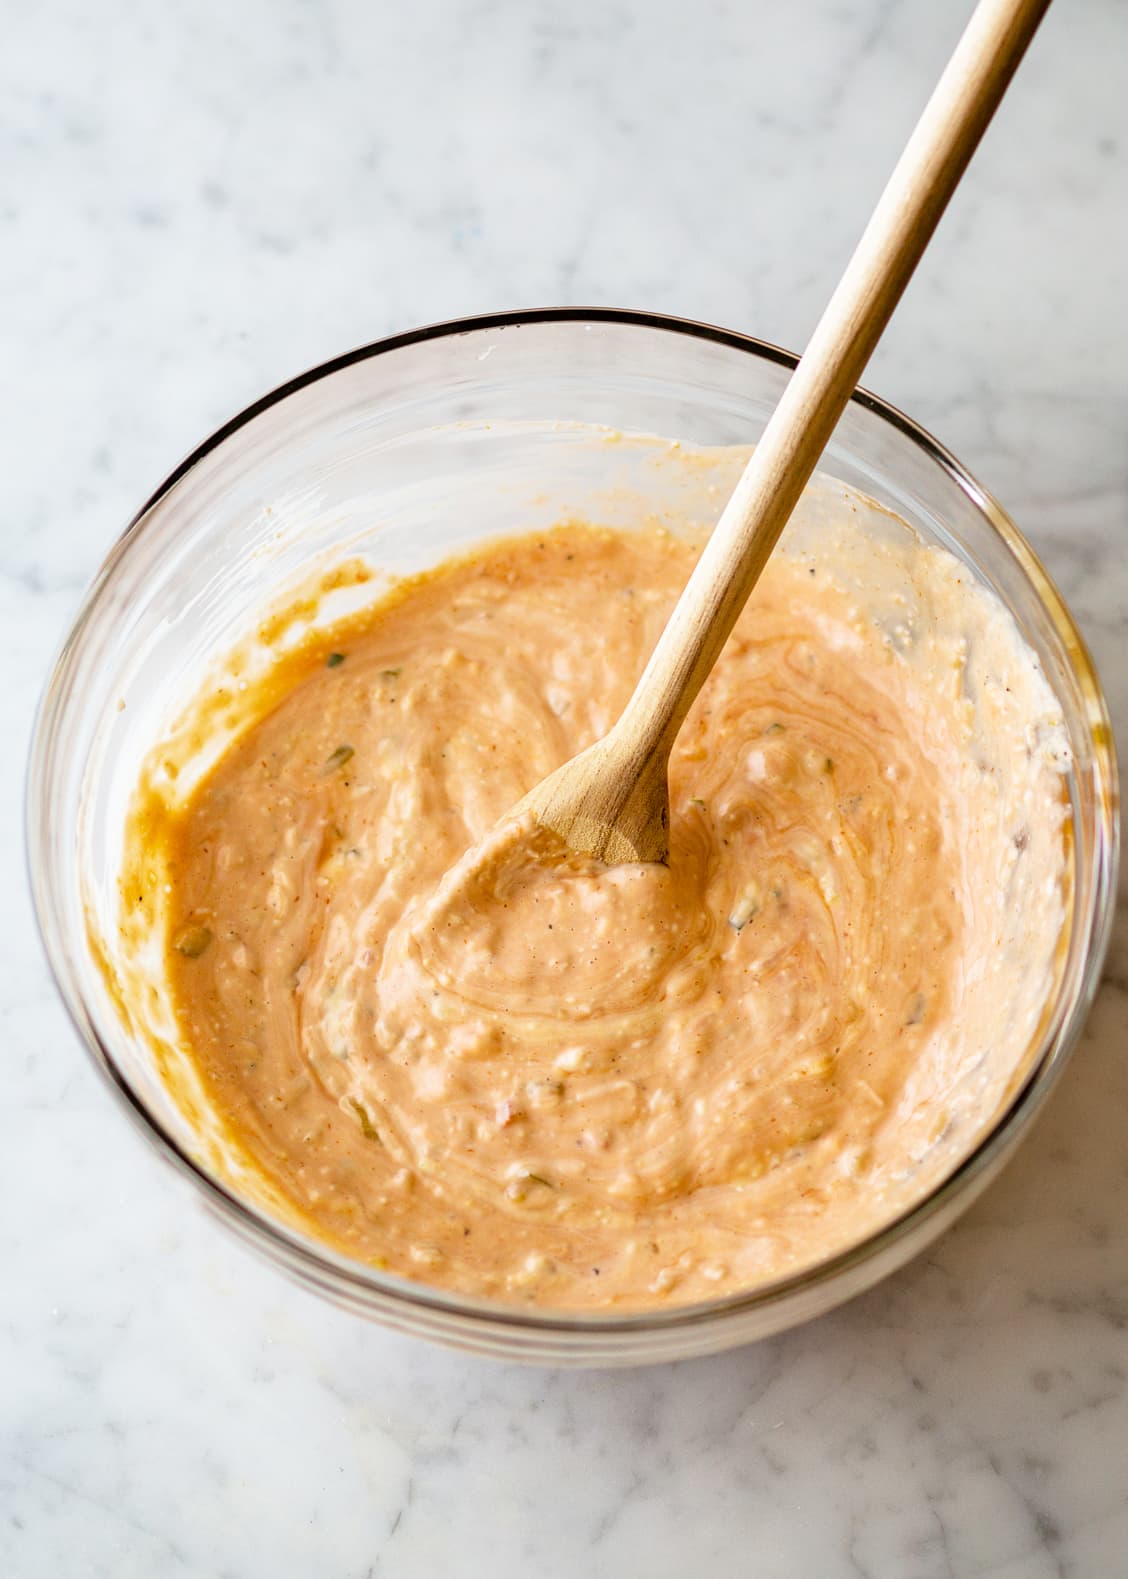 How To Make Classic Thousand Island Dressing